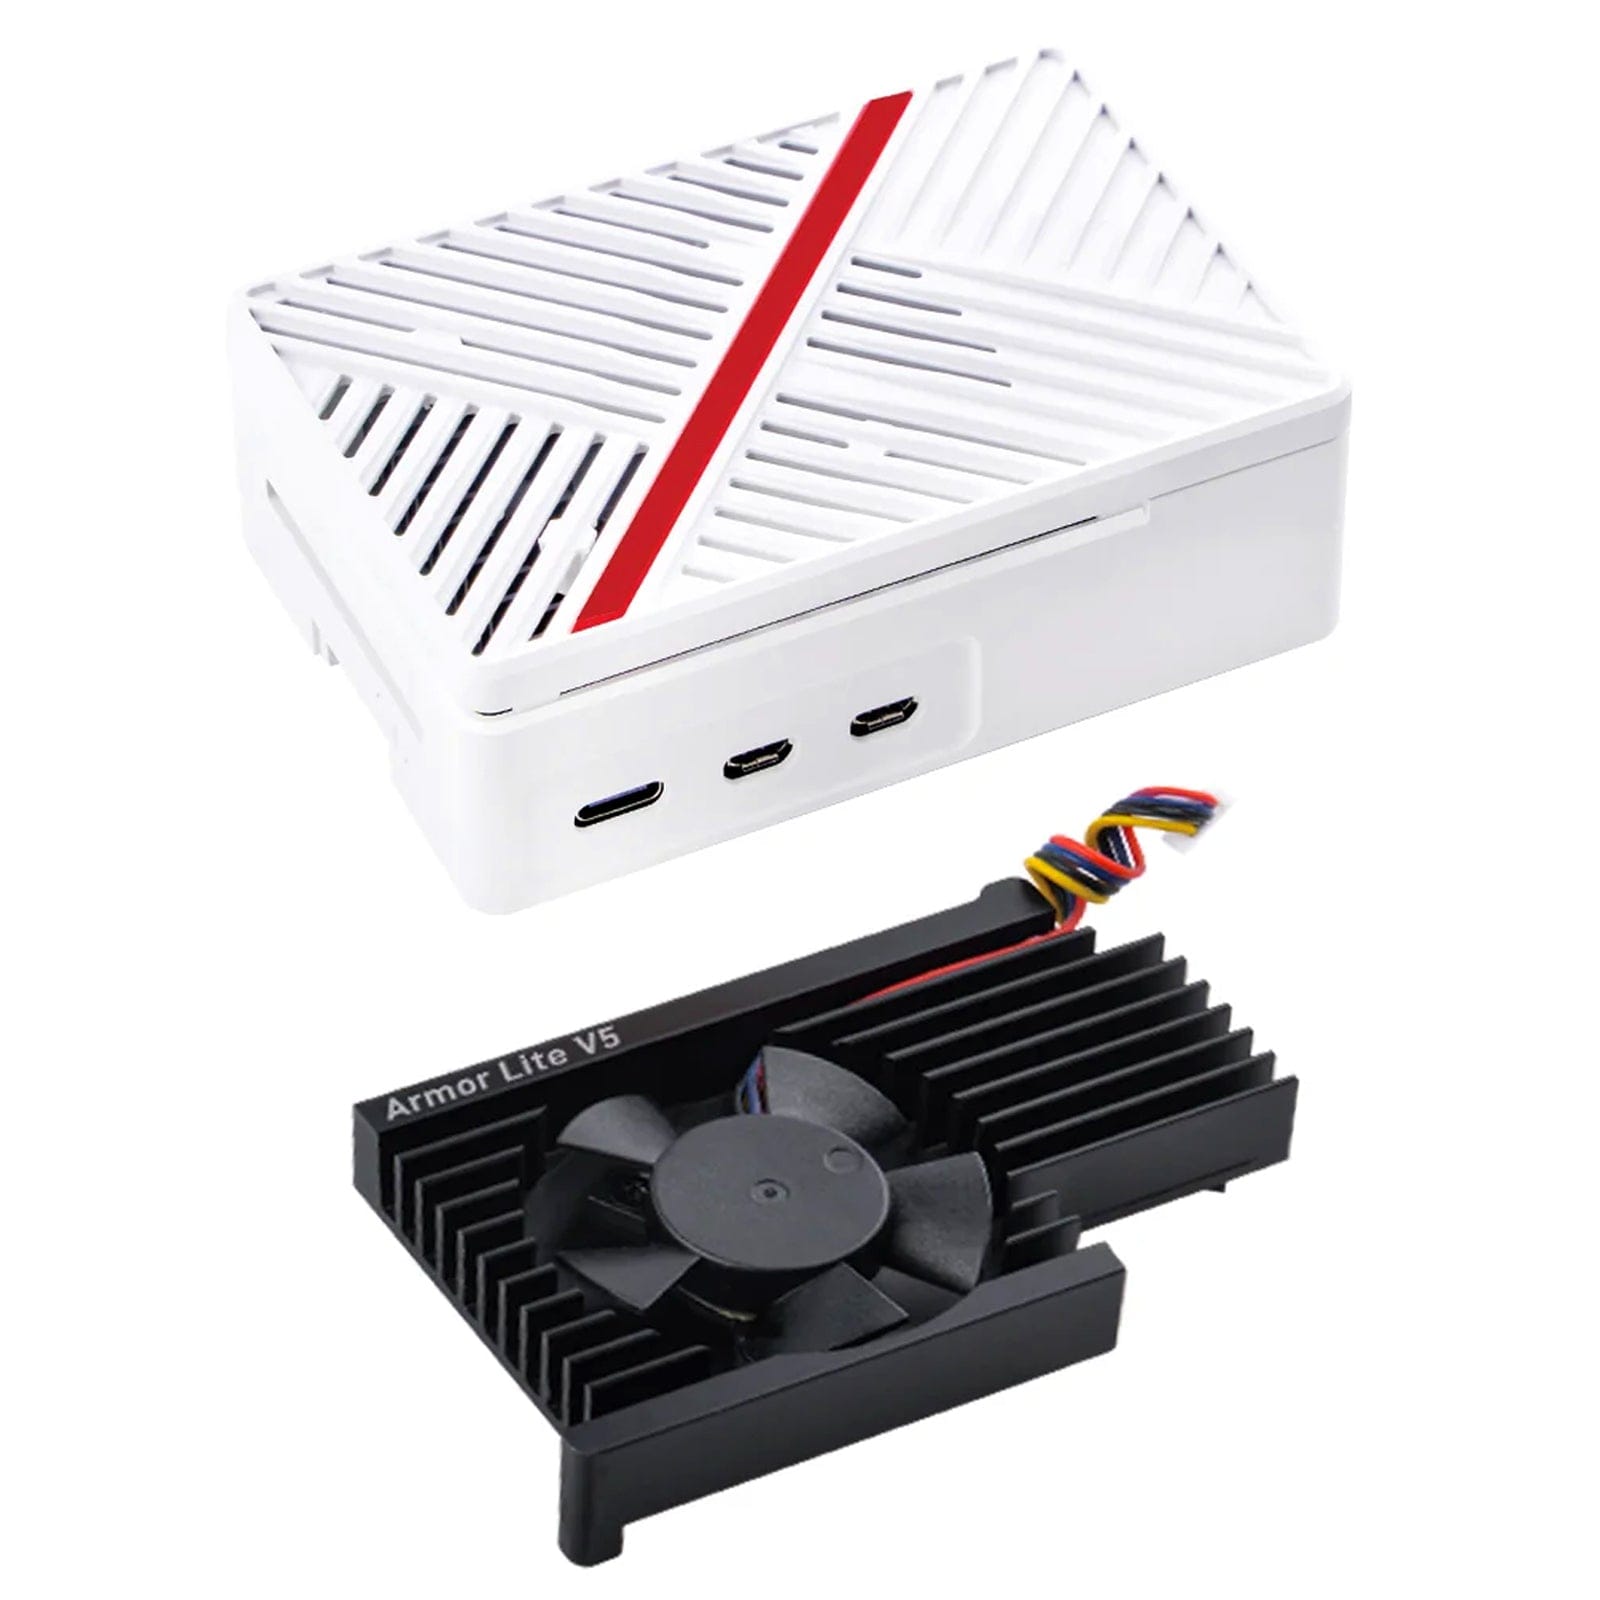 ABS Fan Case for Raspberry Pi 5 - The Pi Hut